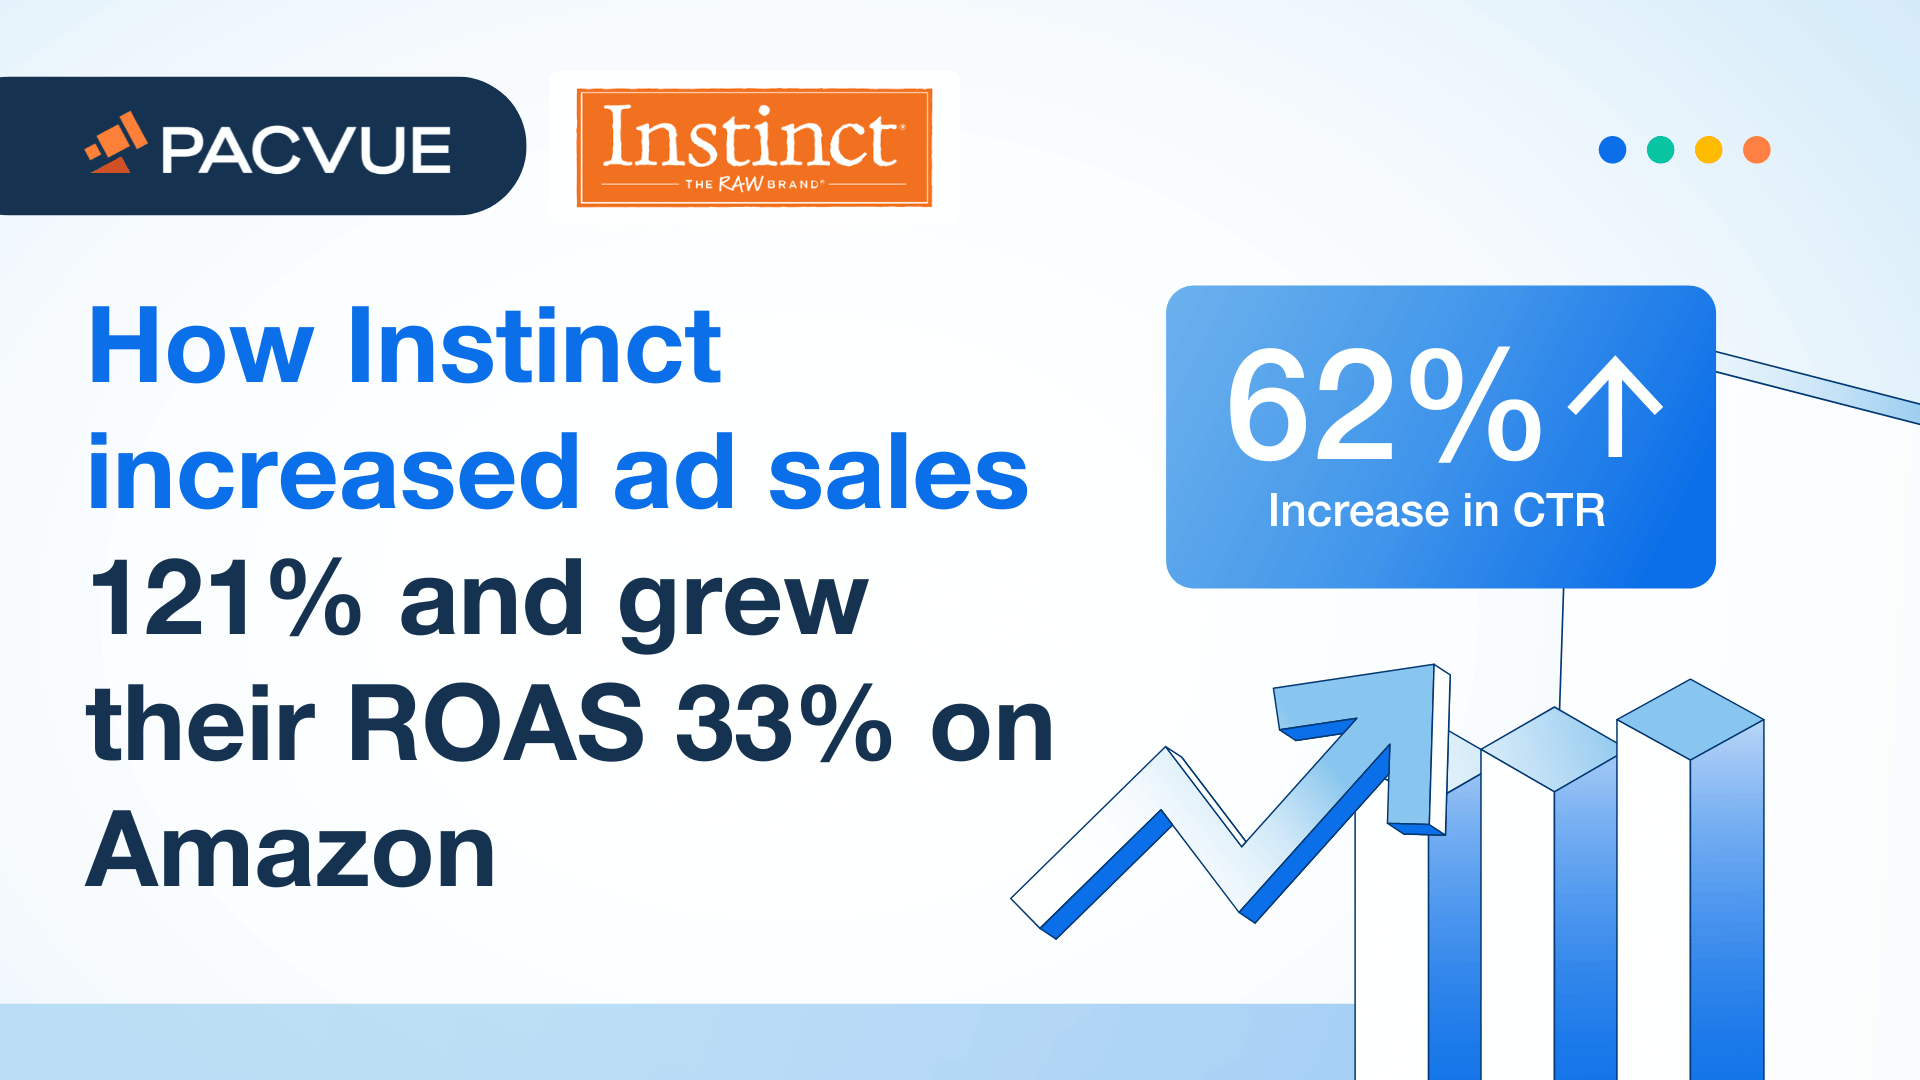 How Instinct increased ad sales 121% and grew their ROAS 33% on Amazon